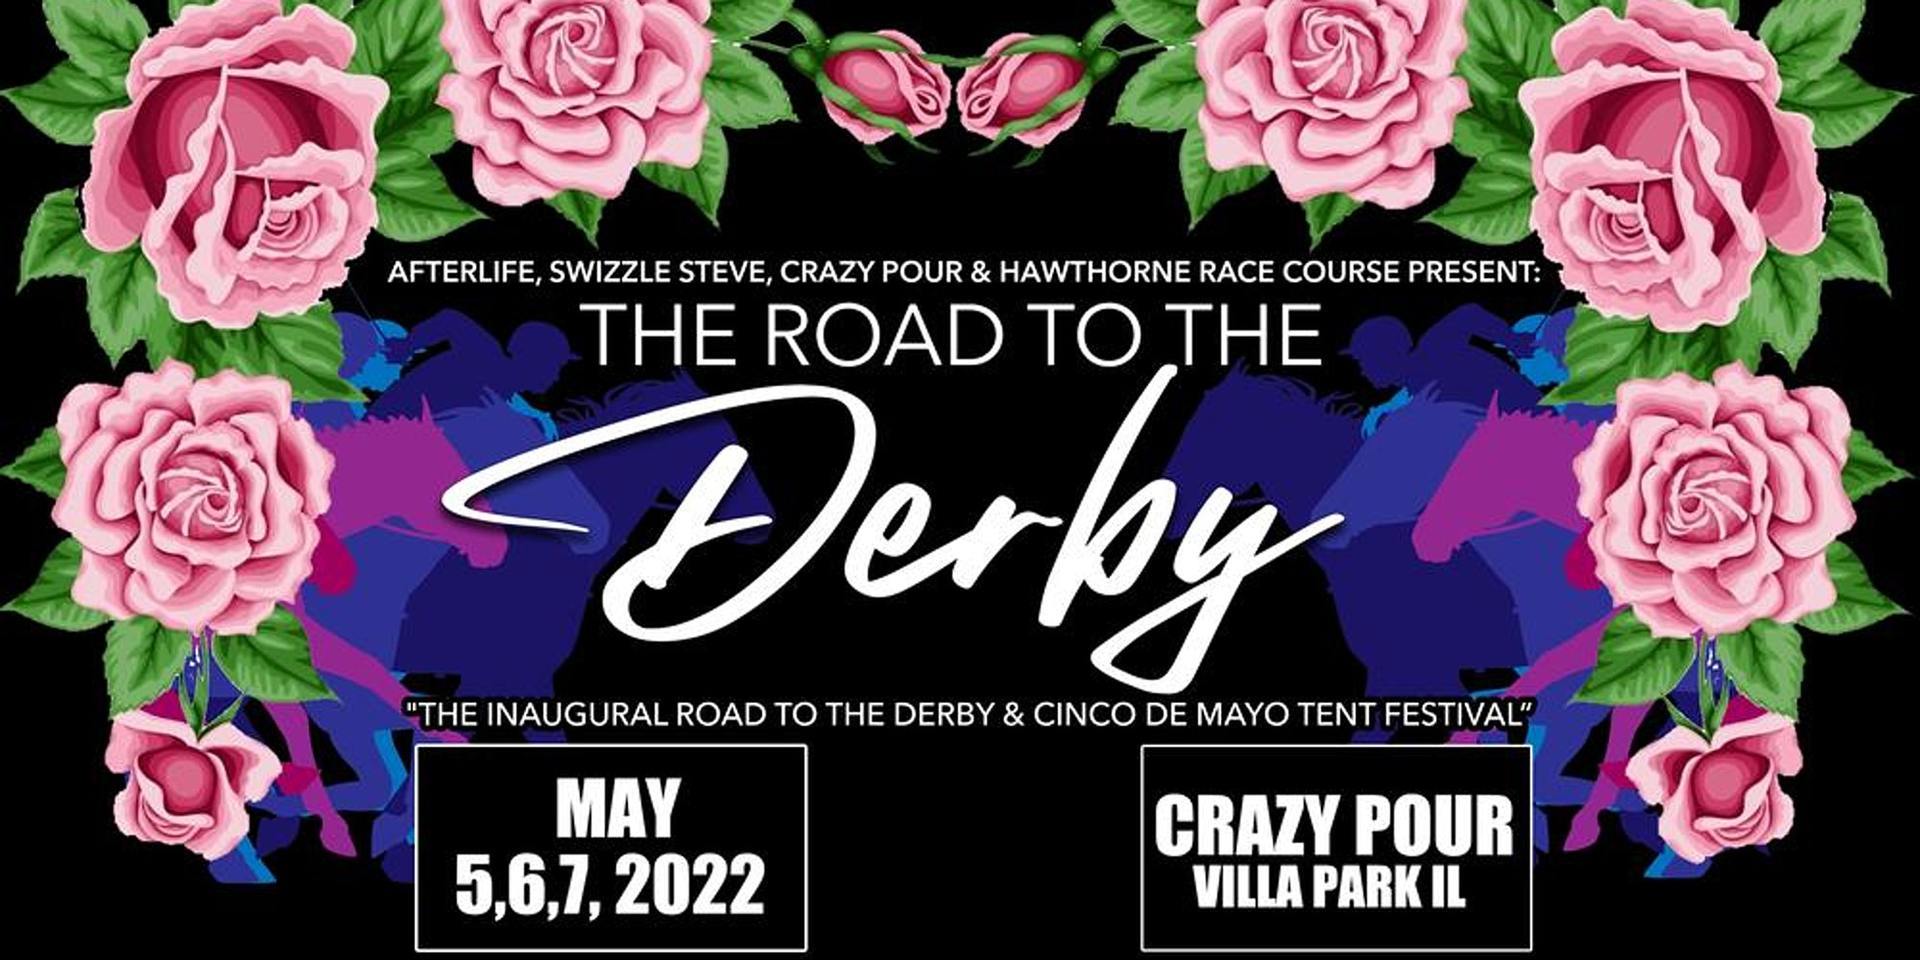 The Inaugural Road to the Derby and Cinco De Mayo Tent Festival at Crazy Pour, Villa Park, Illinois, United States